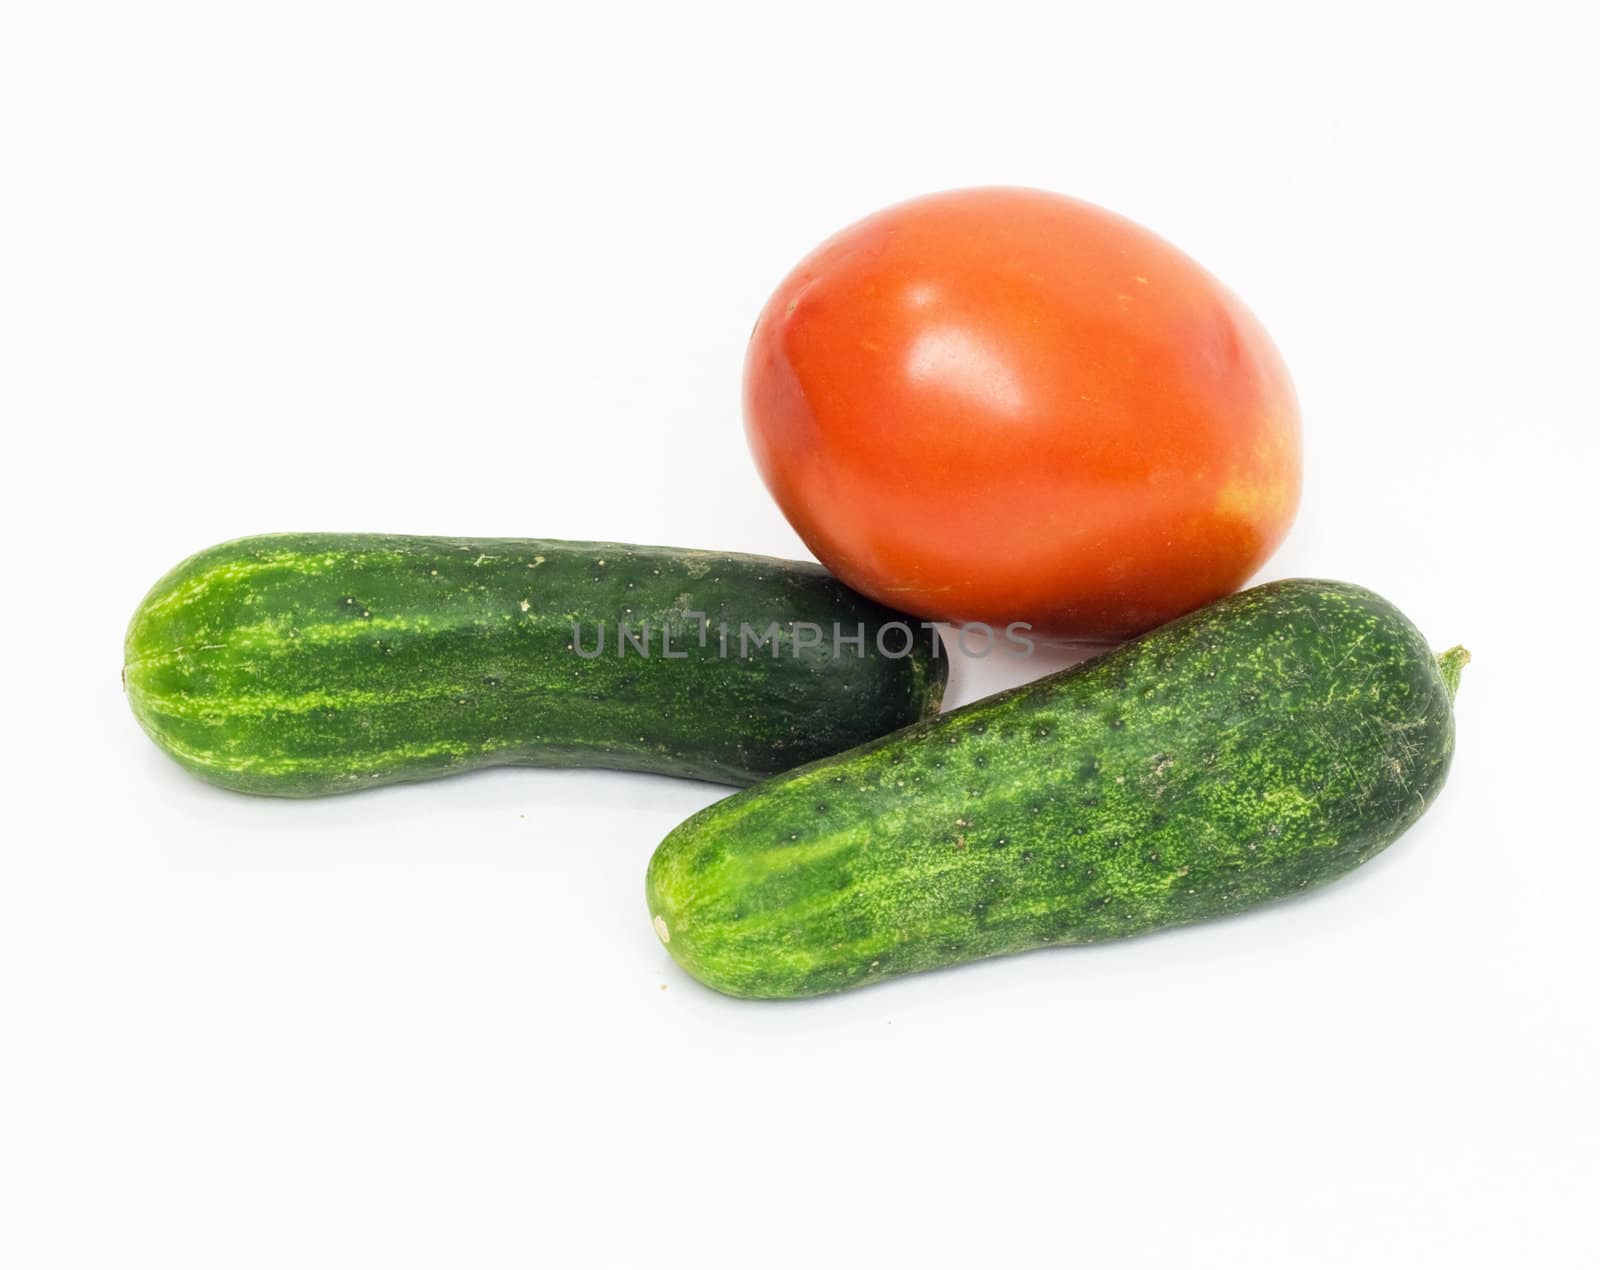 red tomato and cucumber together on a white background  by schankz